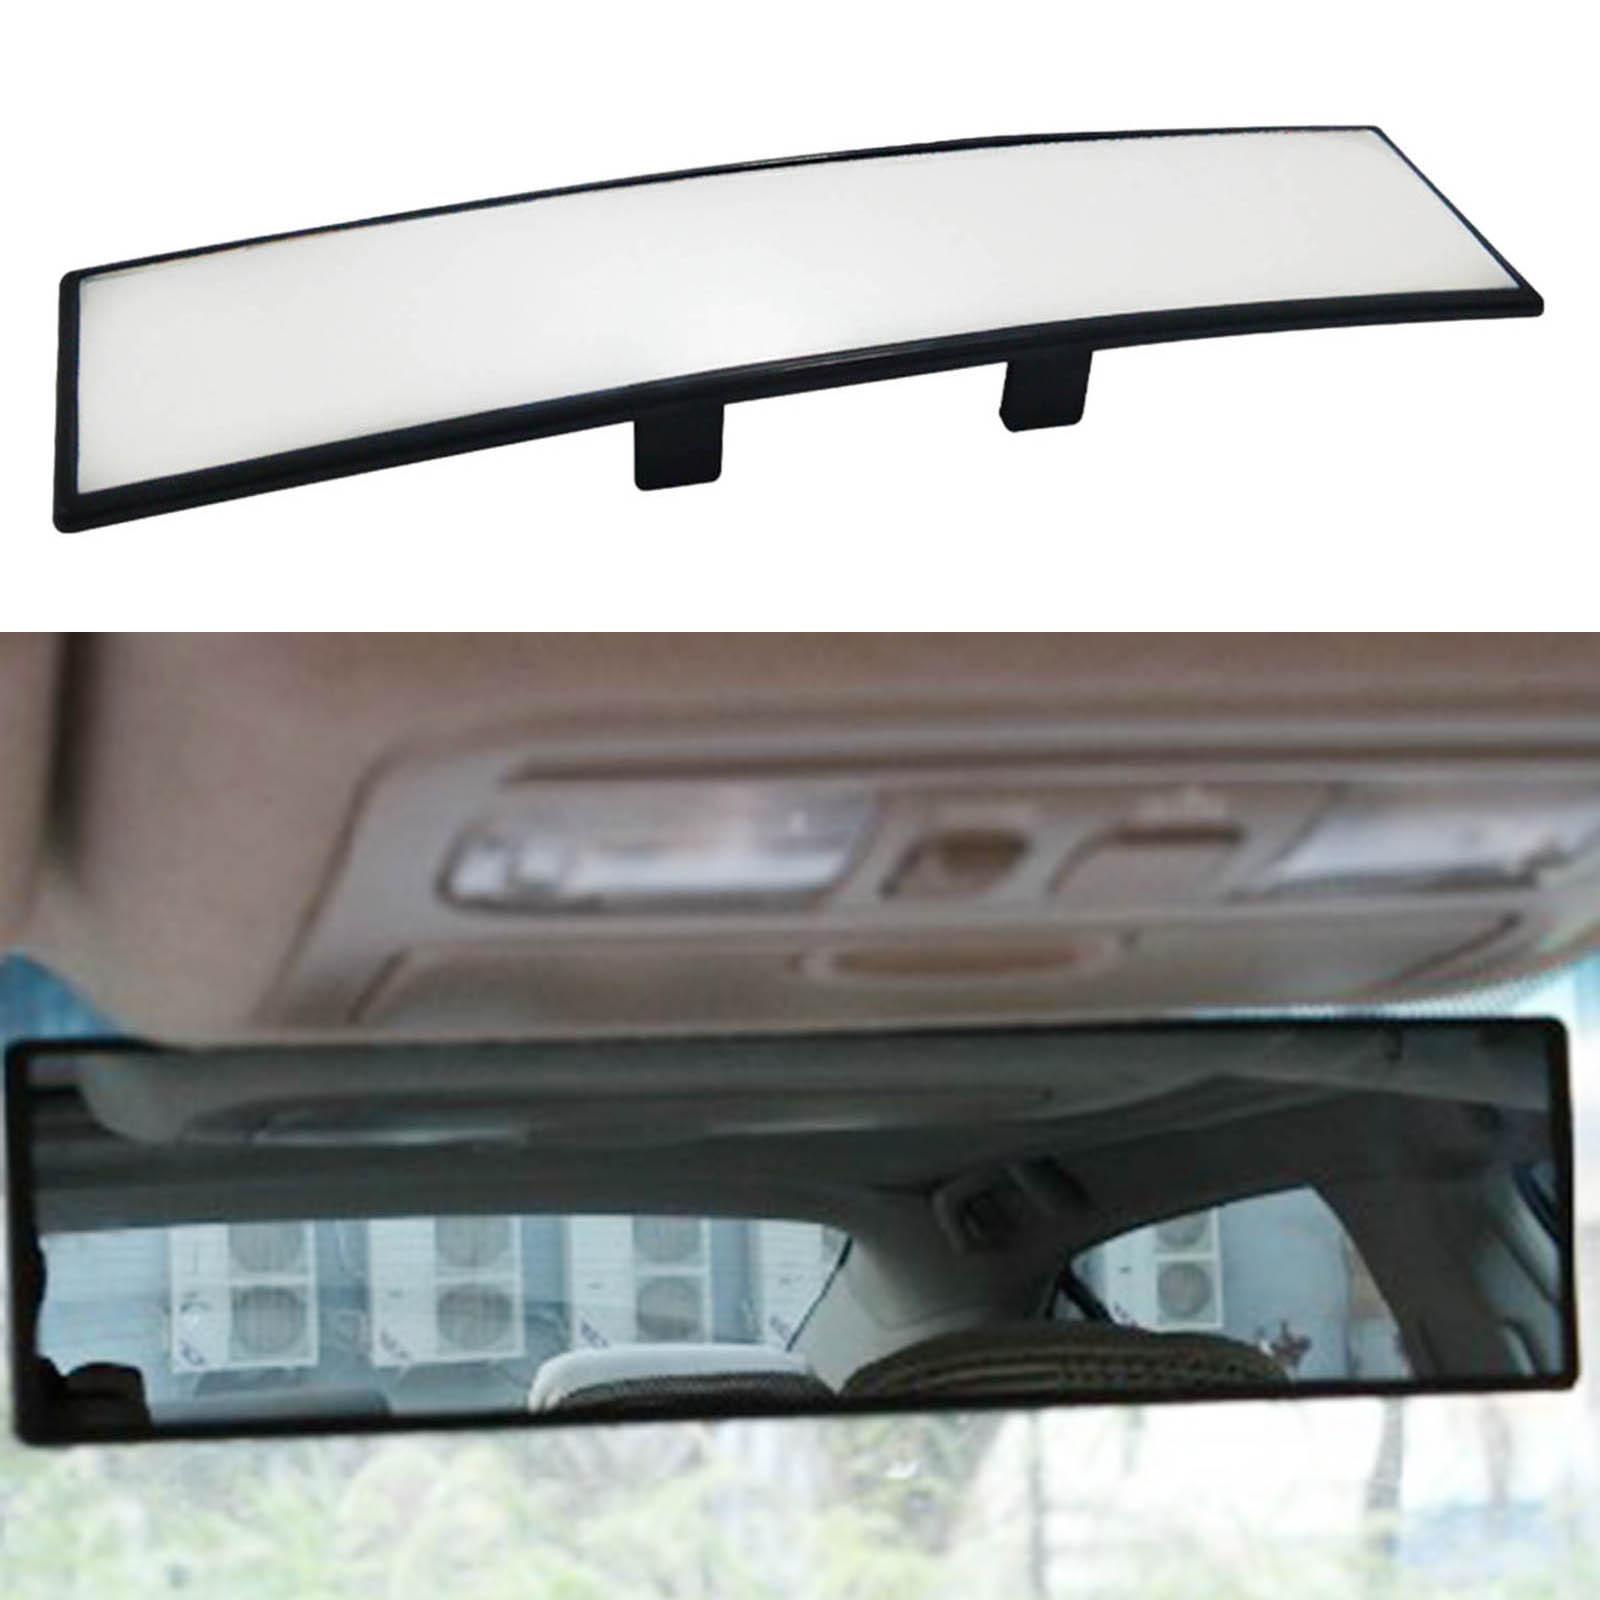 Car Rear View Mirror Wide Angle for Truck Parking Length 270mm Blue Mirror